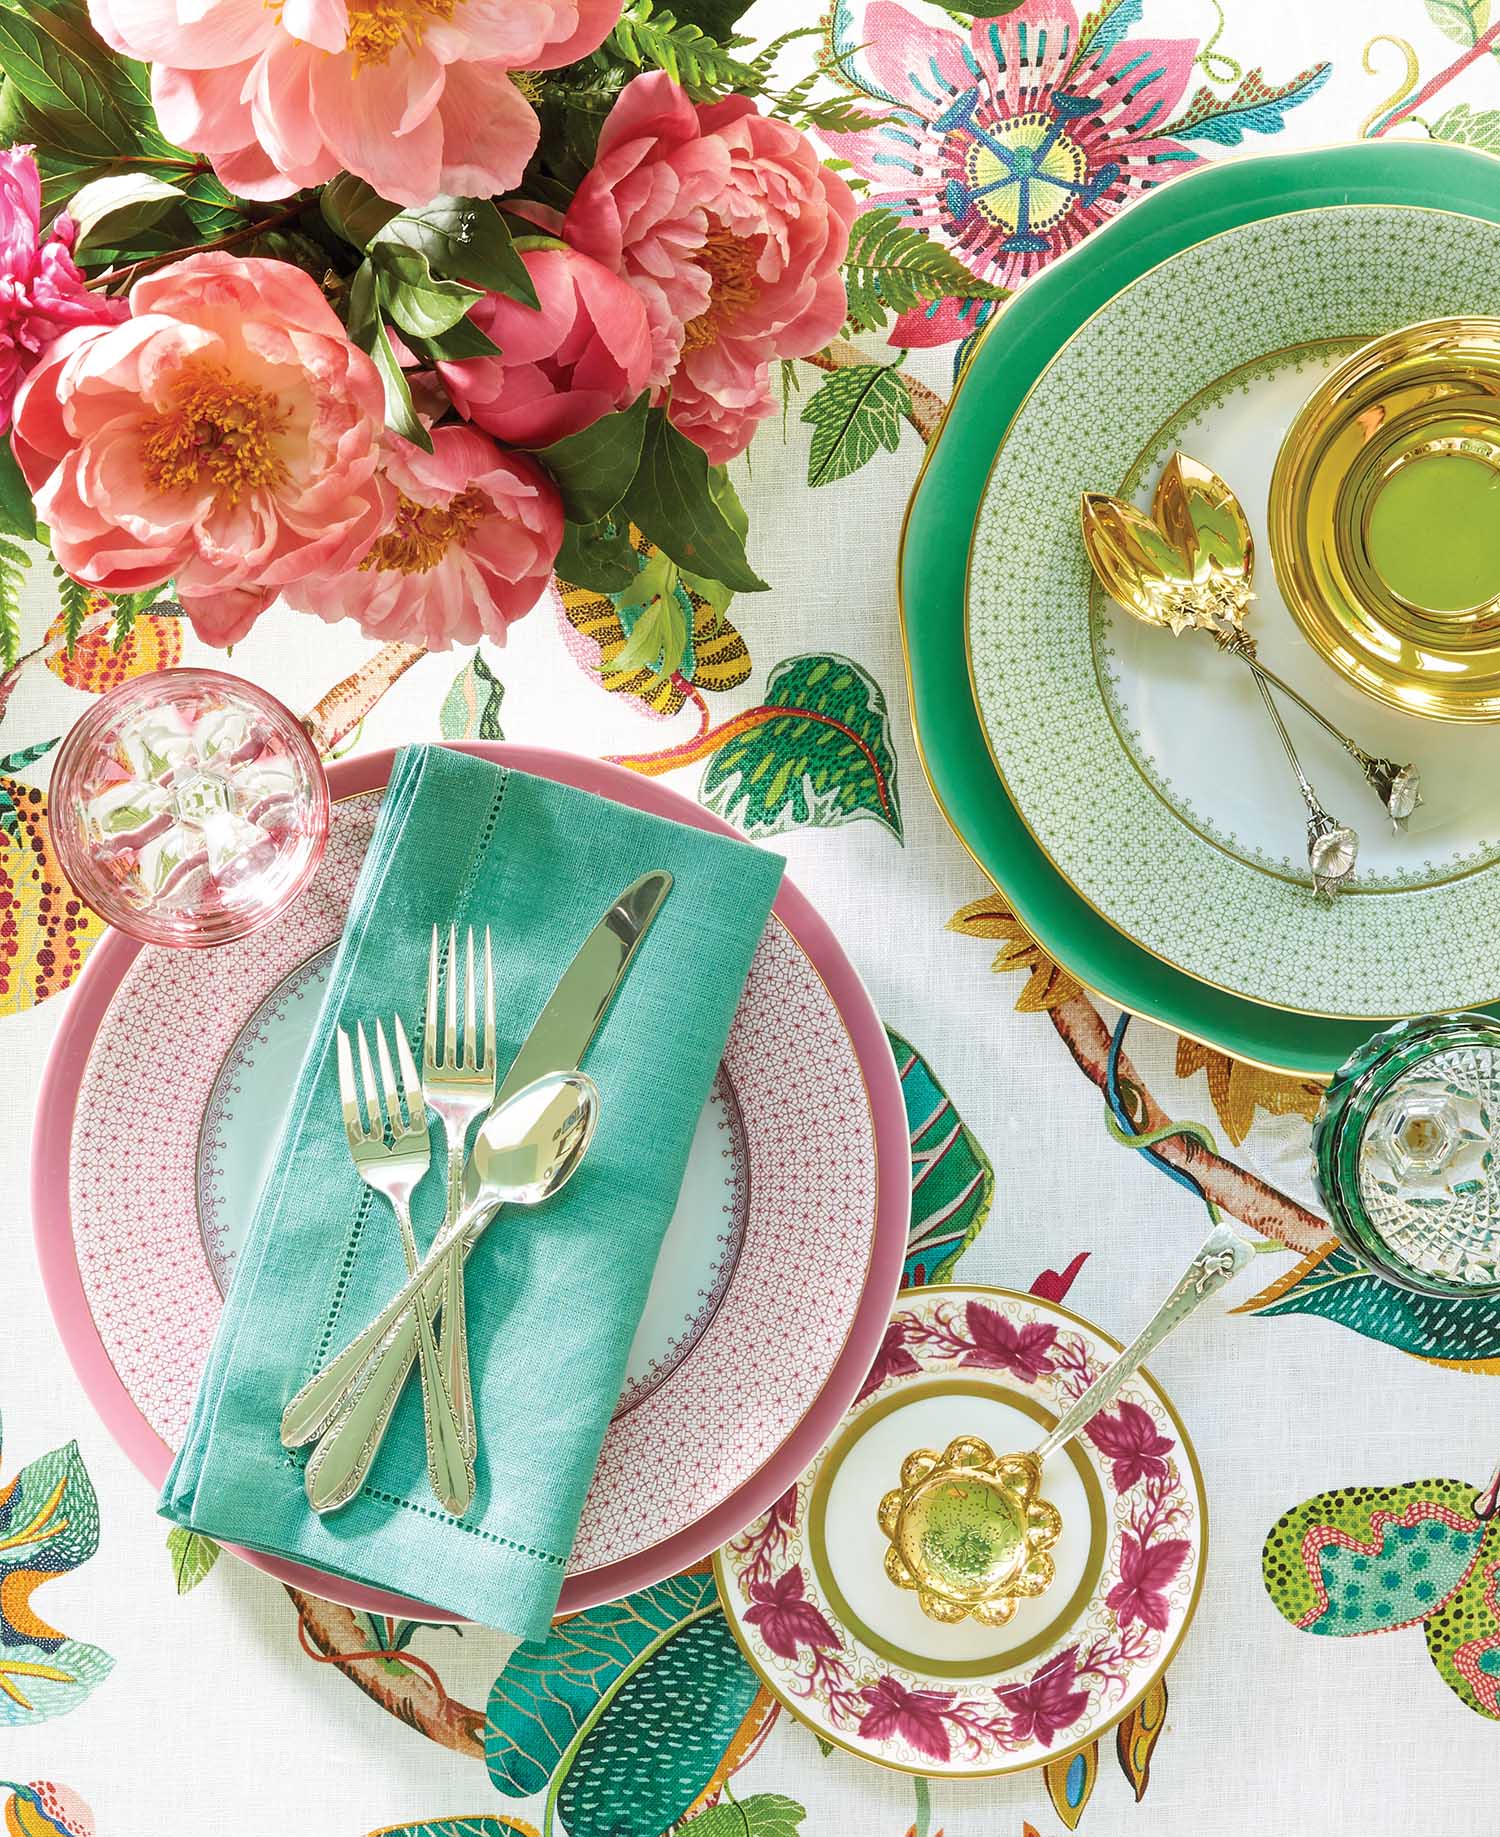 A turquoise napkin sits on top of a pink patterned plate with silverware. Pink peonies flow out of a vase next to a green patterned plate with gold silverware.